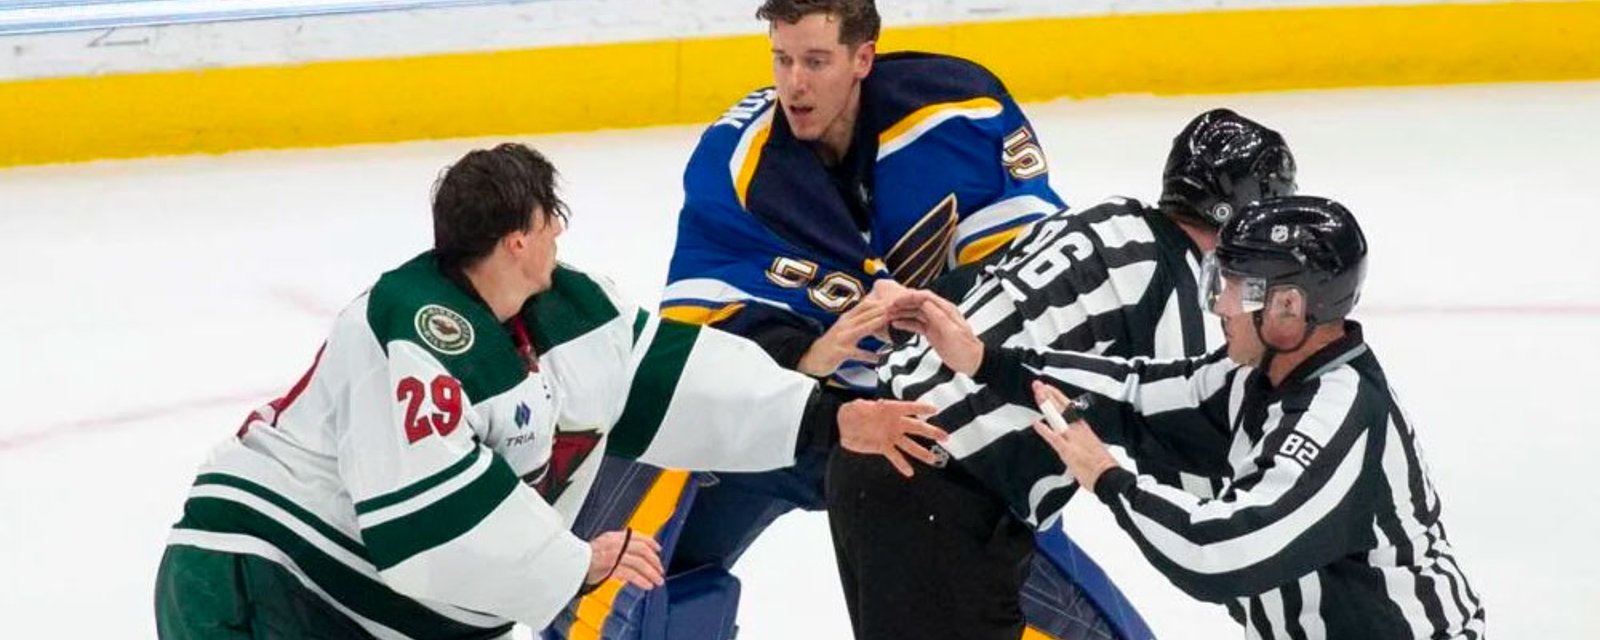 Binnington makes a fool out of himself, gets dinged by NHL Player Safety